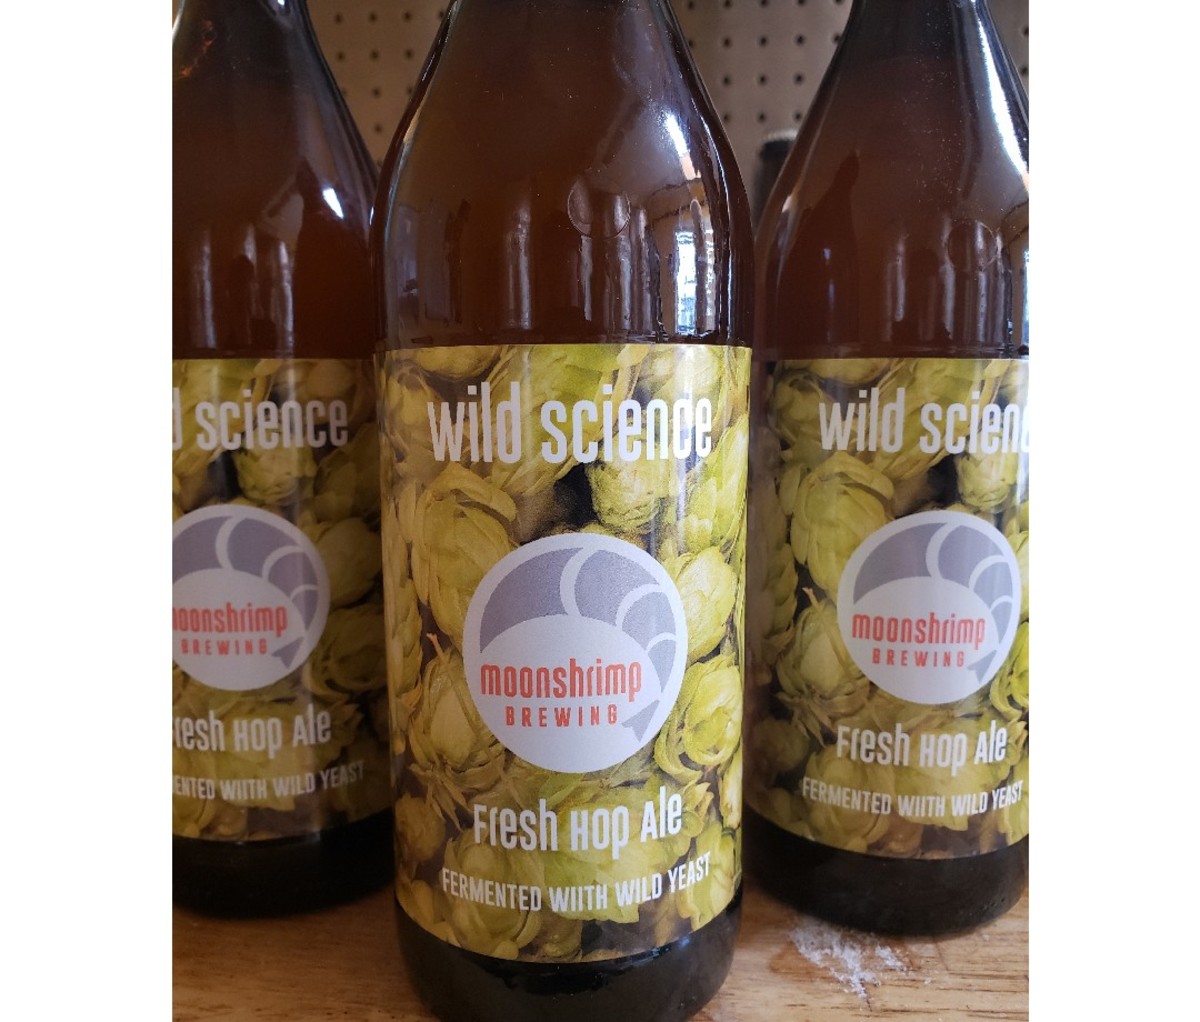 Three bottles of Moonshrimp Brewing Wild Science on a wooden surface